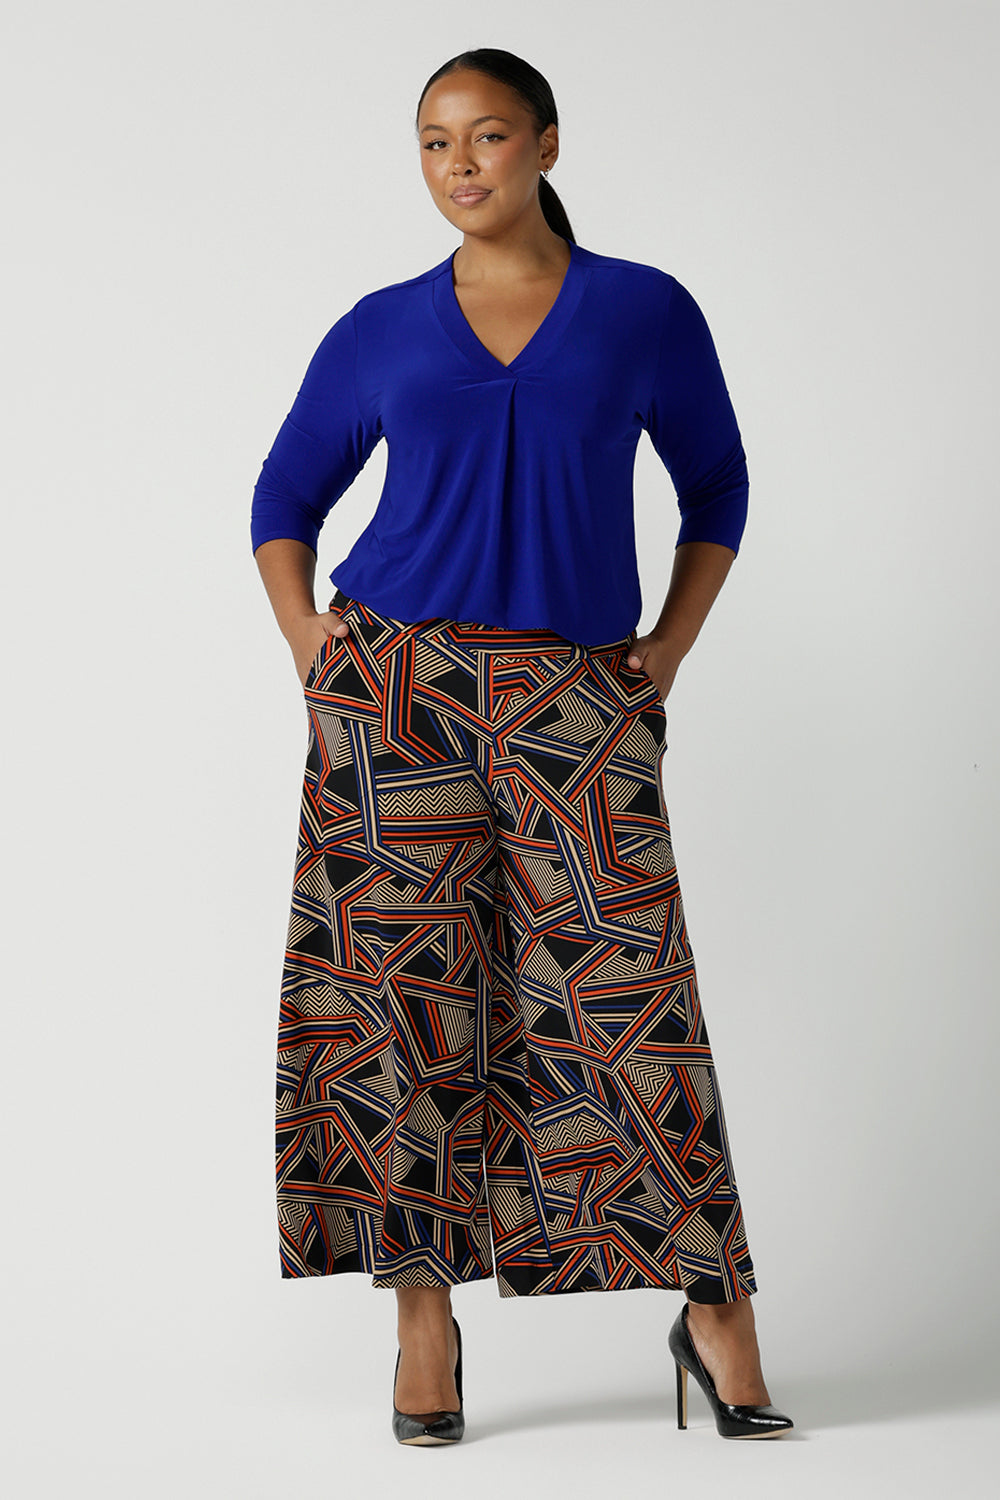 Size 16 woman wears the Dany Culotte in Trixie, a printed Jersey work pant with a geometric pattern. Wide leg with functional pockets and wide waistband. Cropped length and petite height friendly. Made in Australia for women size 8 - 24.